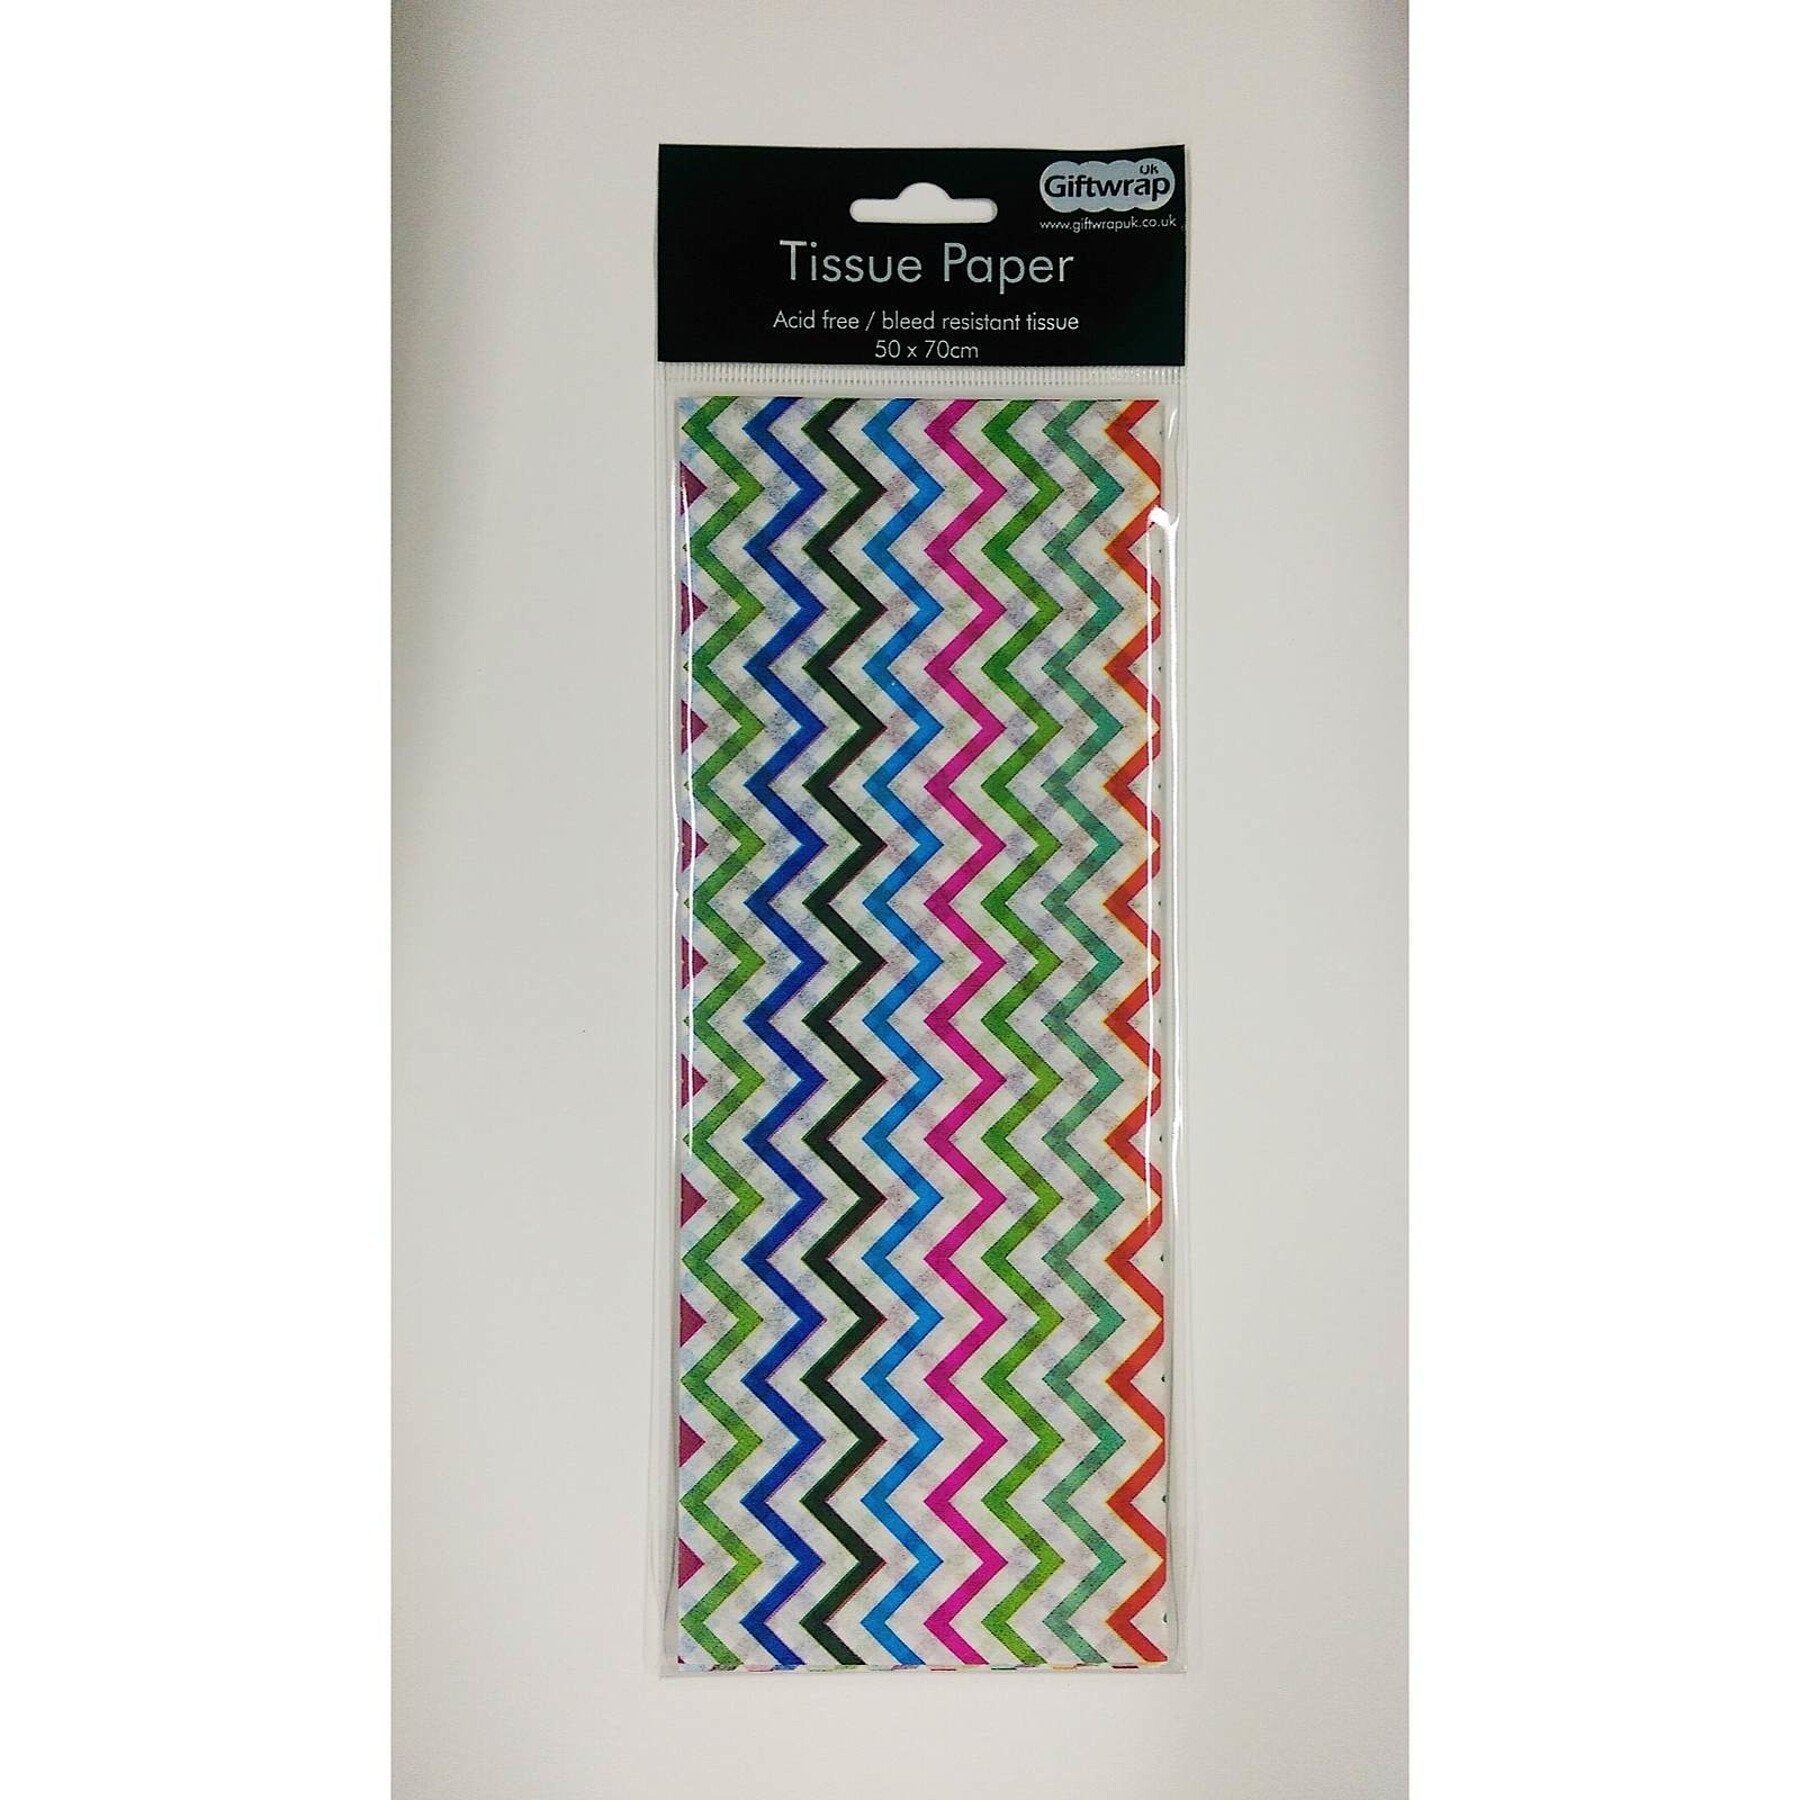 Rainbow ZigZag Patterned Acid Free Tissue Paper (3 Sheets per Pack)